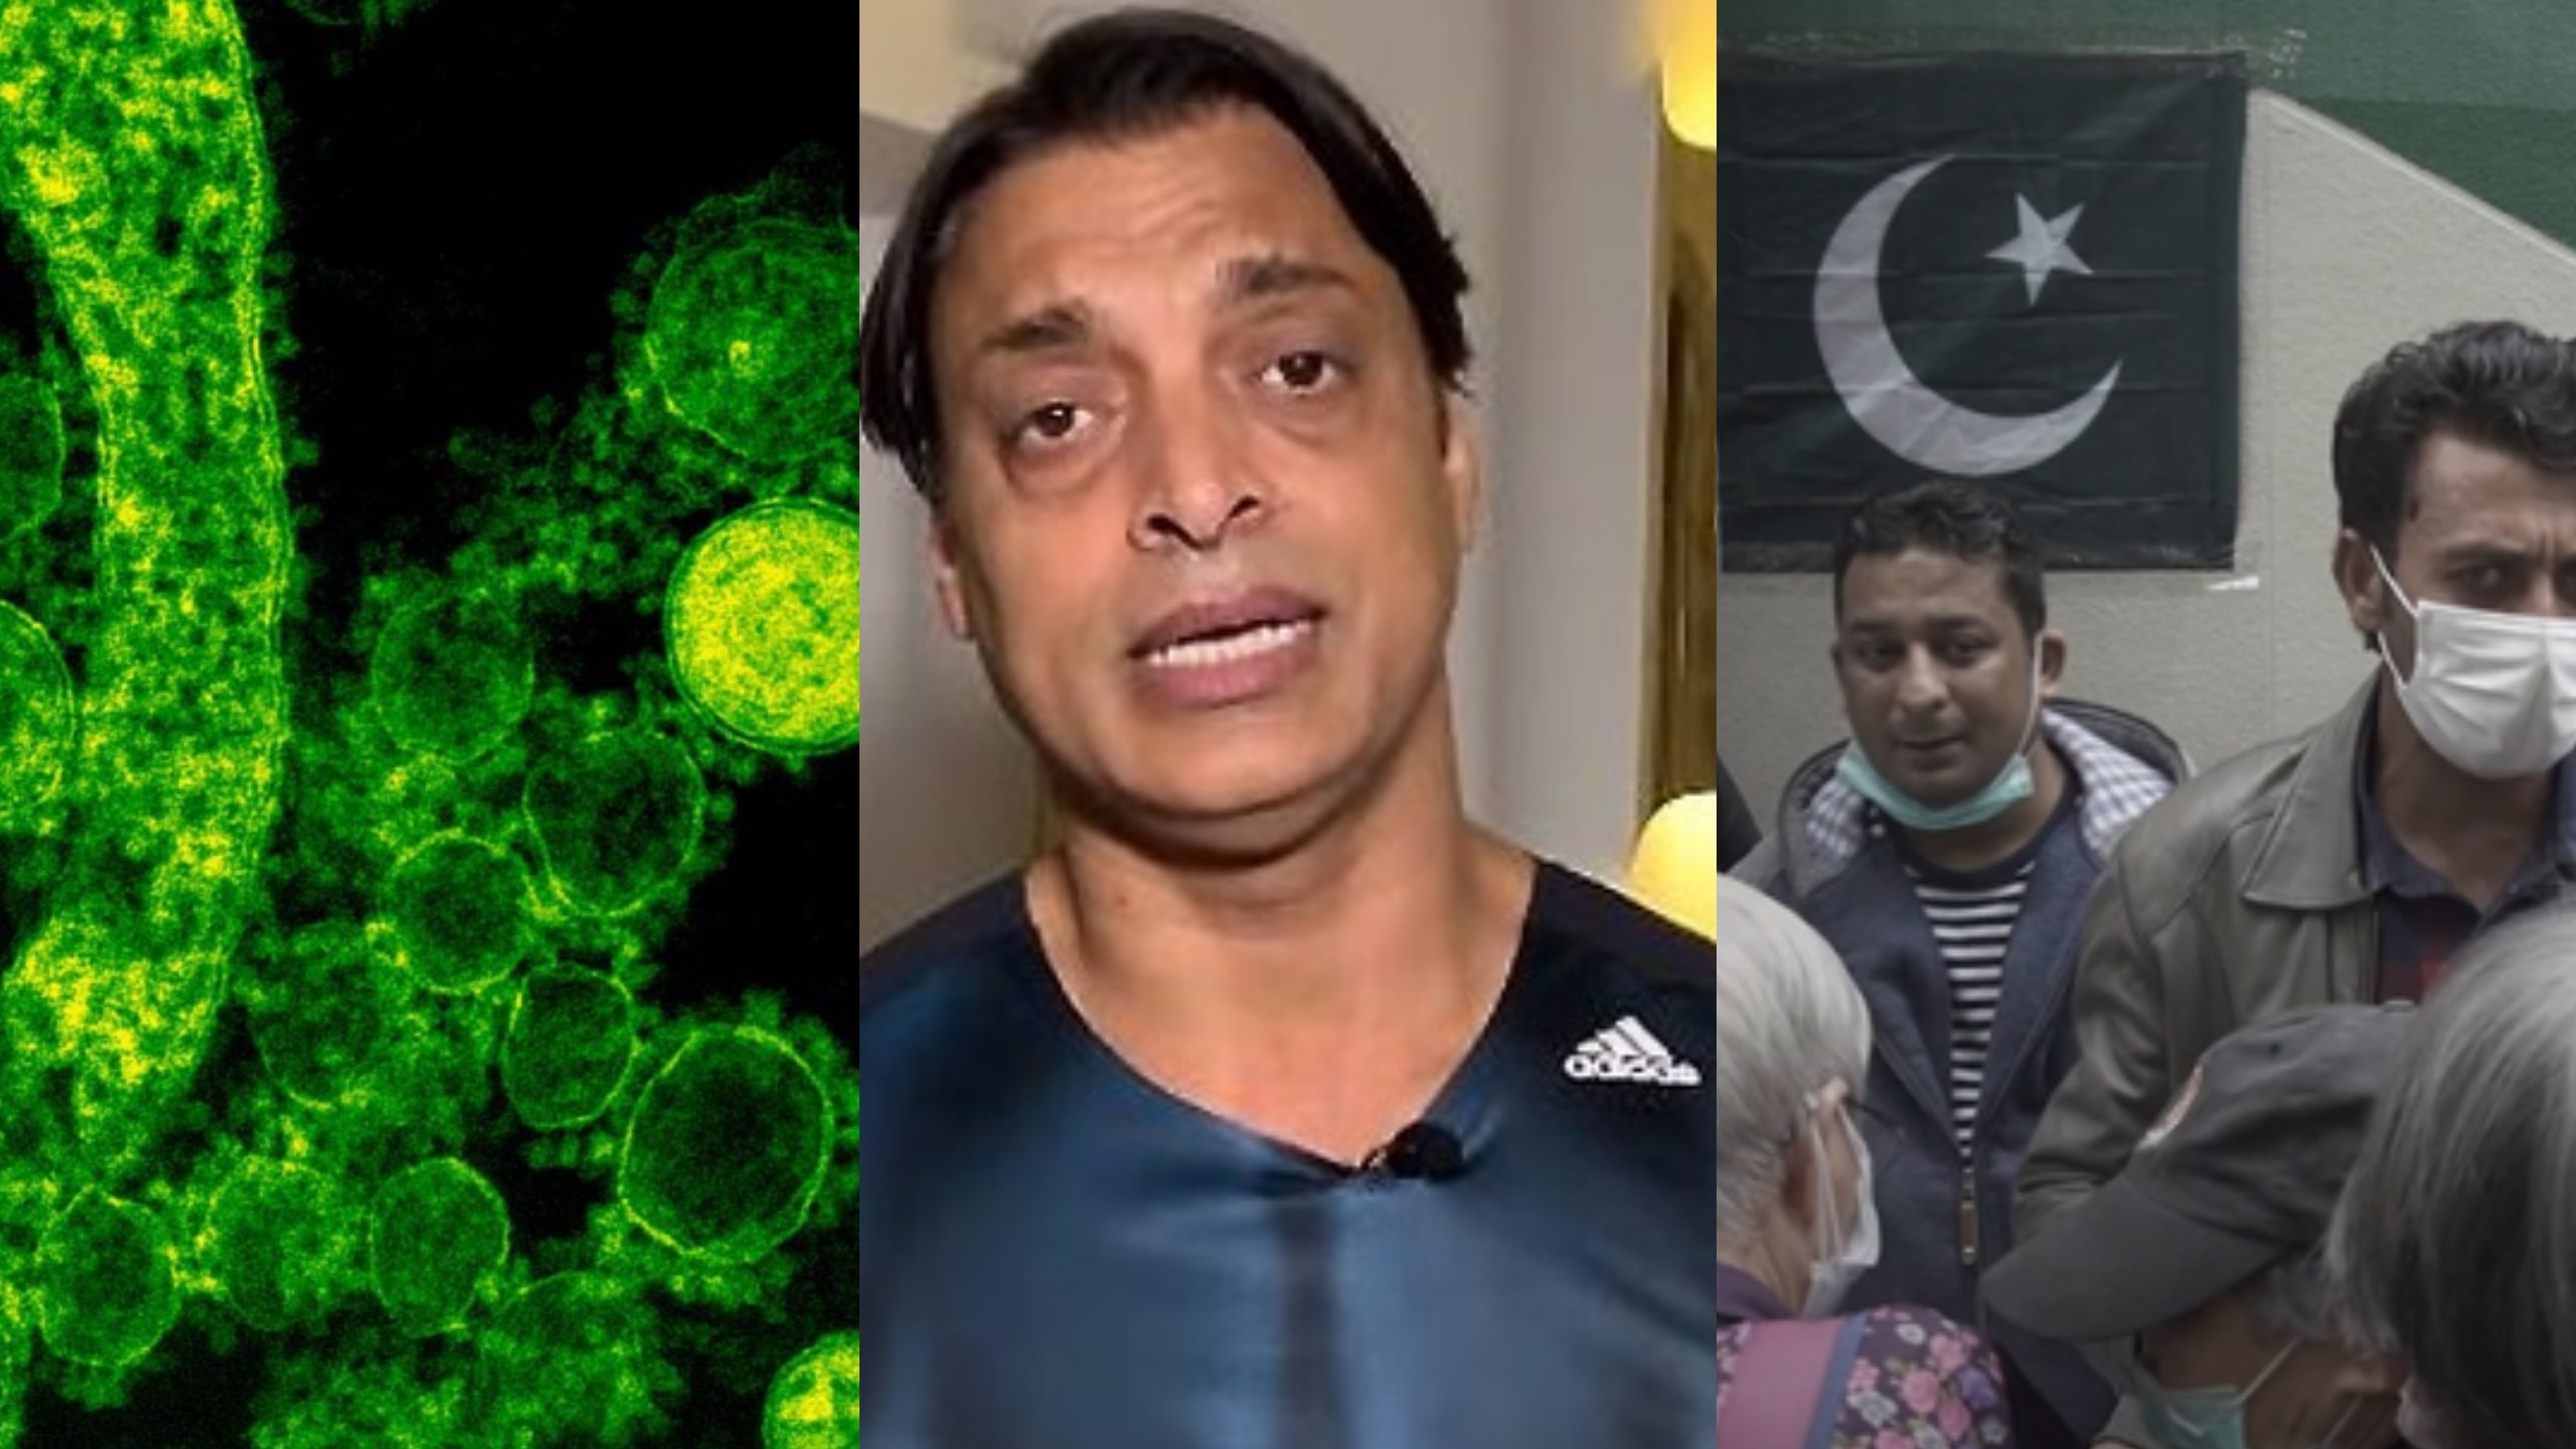 Shoaib Akhtar hits out at people for 